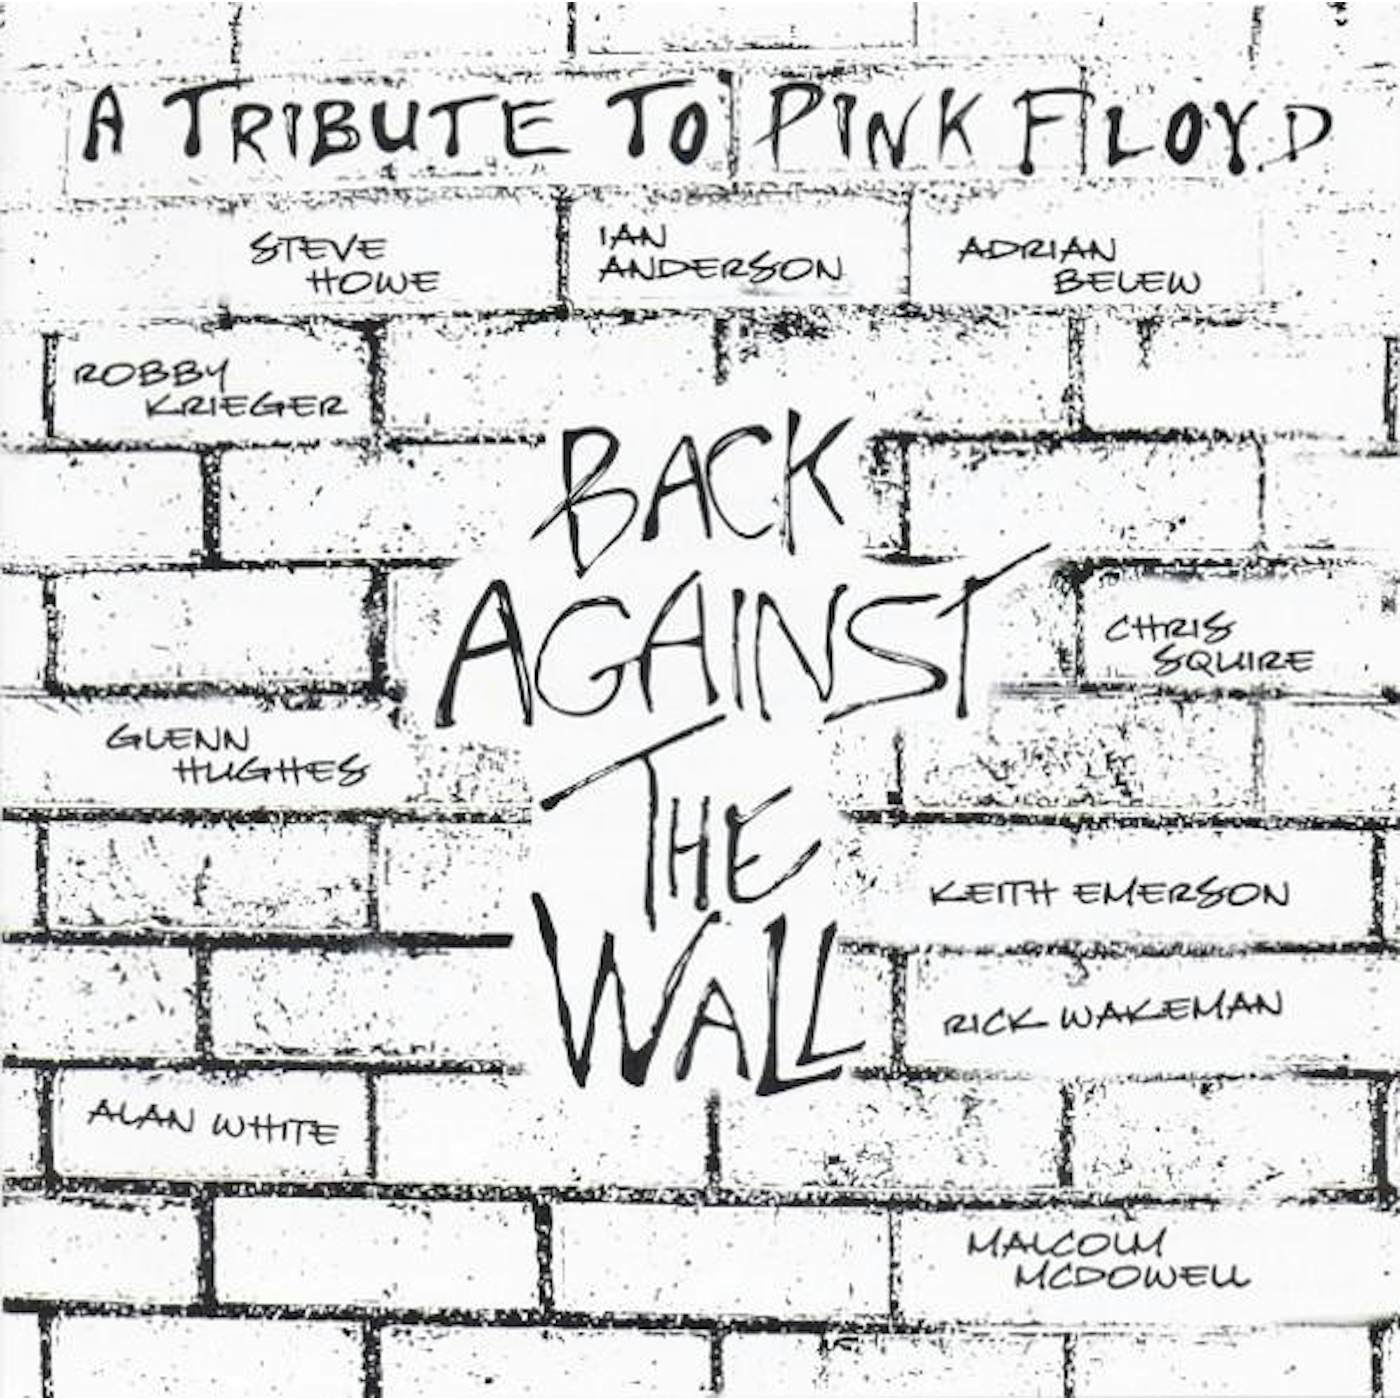 Adrian Belew BACK AGAINST THE WALL- TRIBUTE TO PINK FLOYD (2LP) Vinyl Record